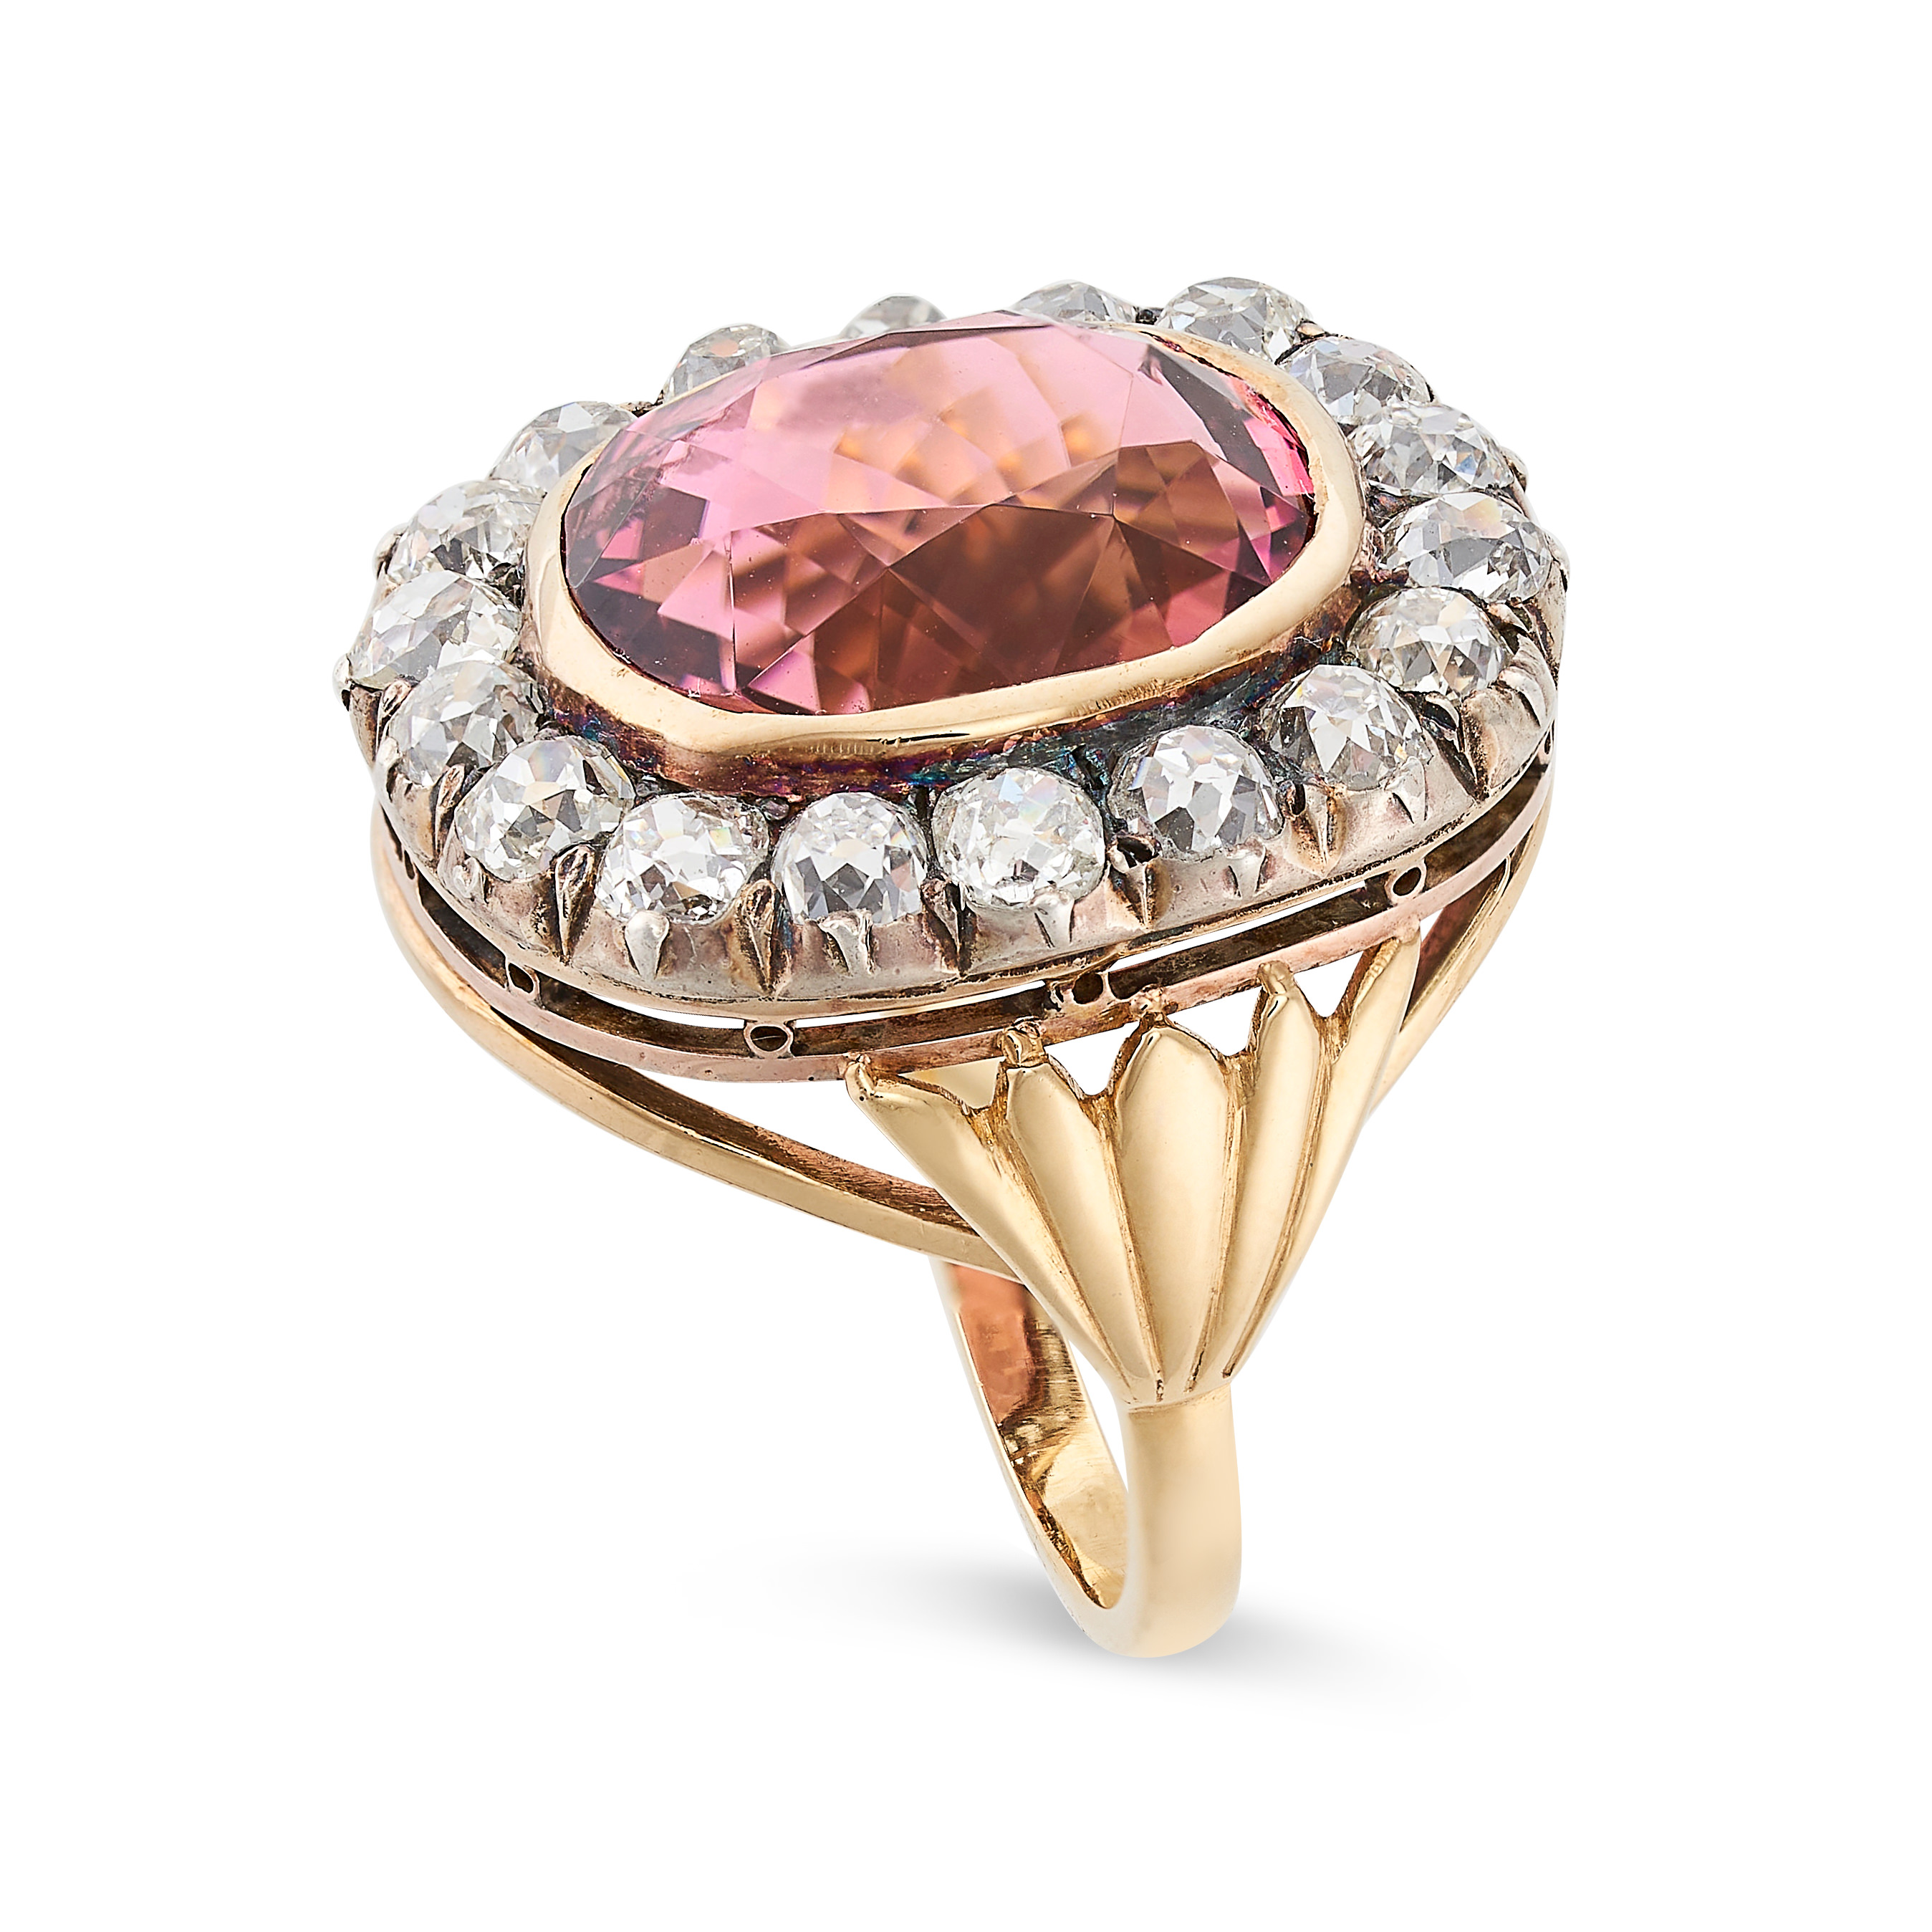 A FINE ANTIQUE PINK TOURMALINE AND DIAMOND RING, 19TH CENTURY in yellow gold and silver, set with - Image 2 of 2